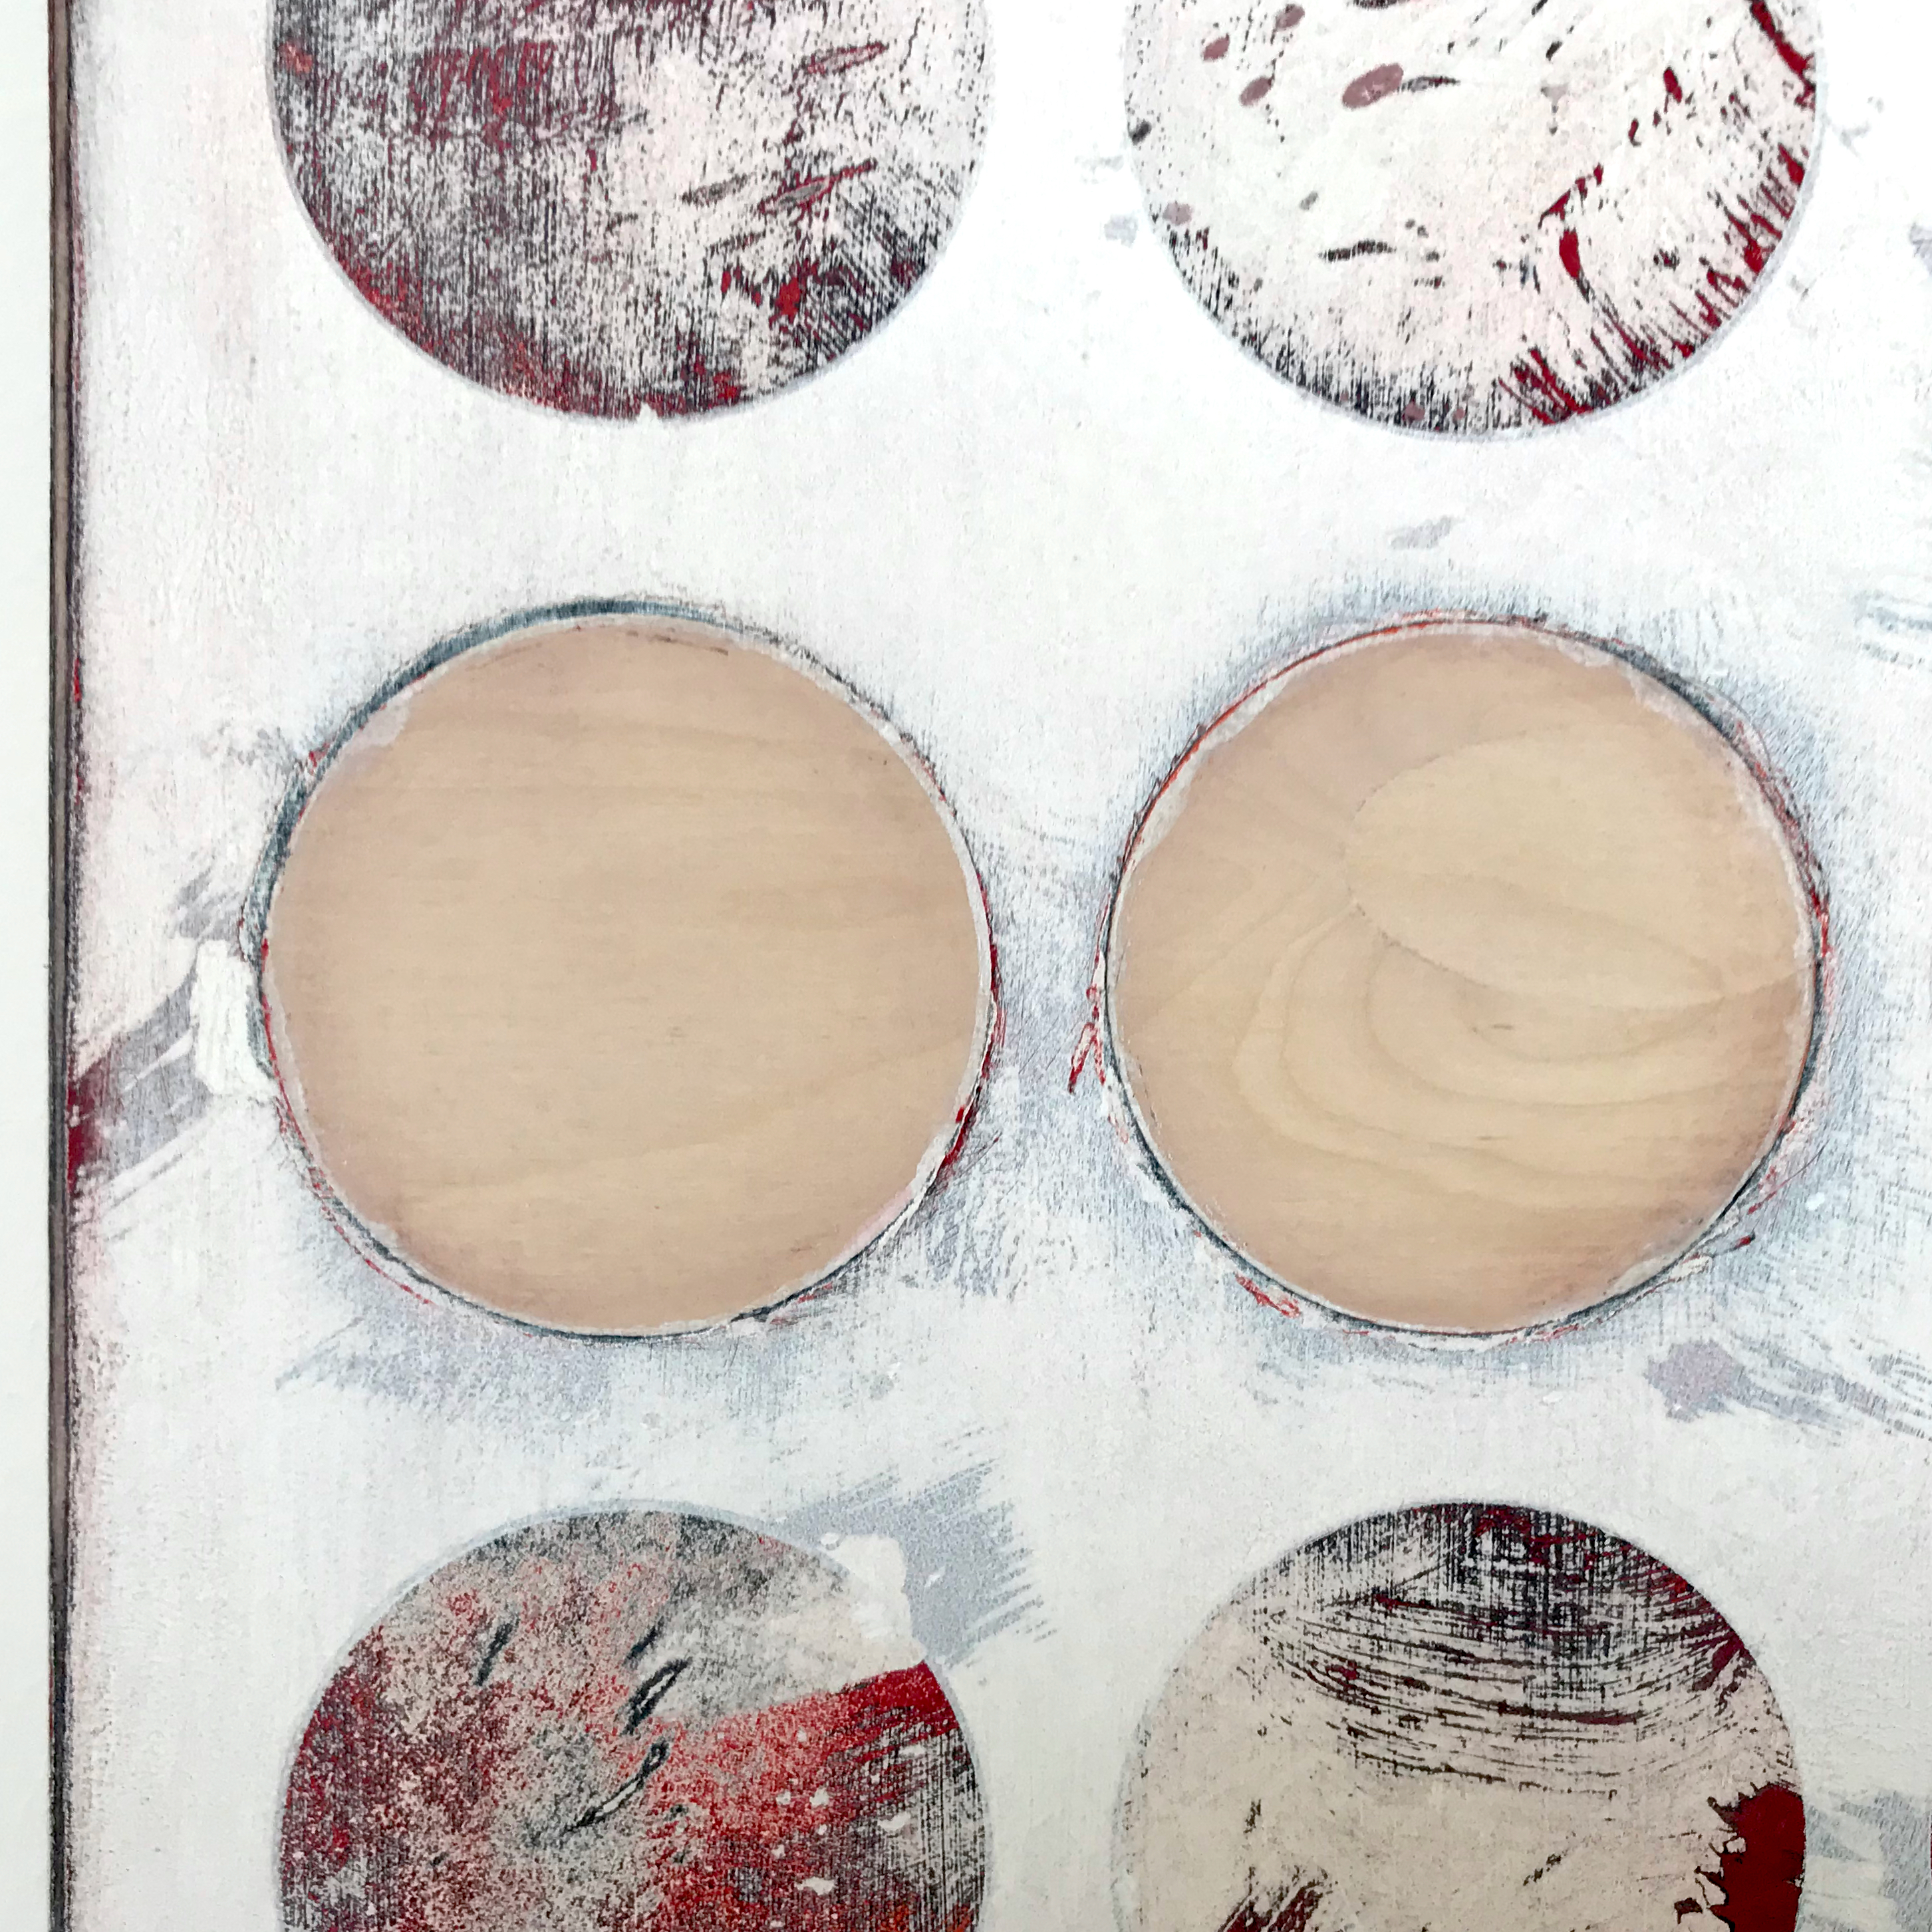 Untitled (red circles) detail